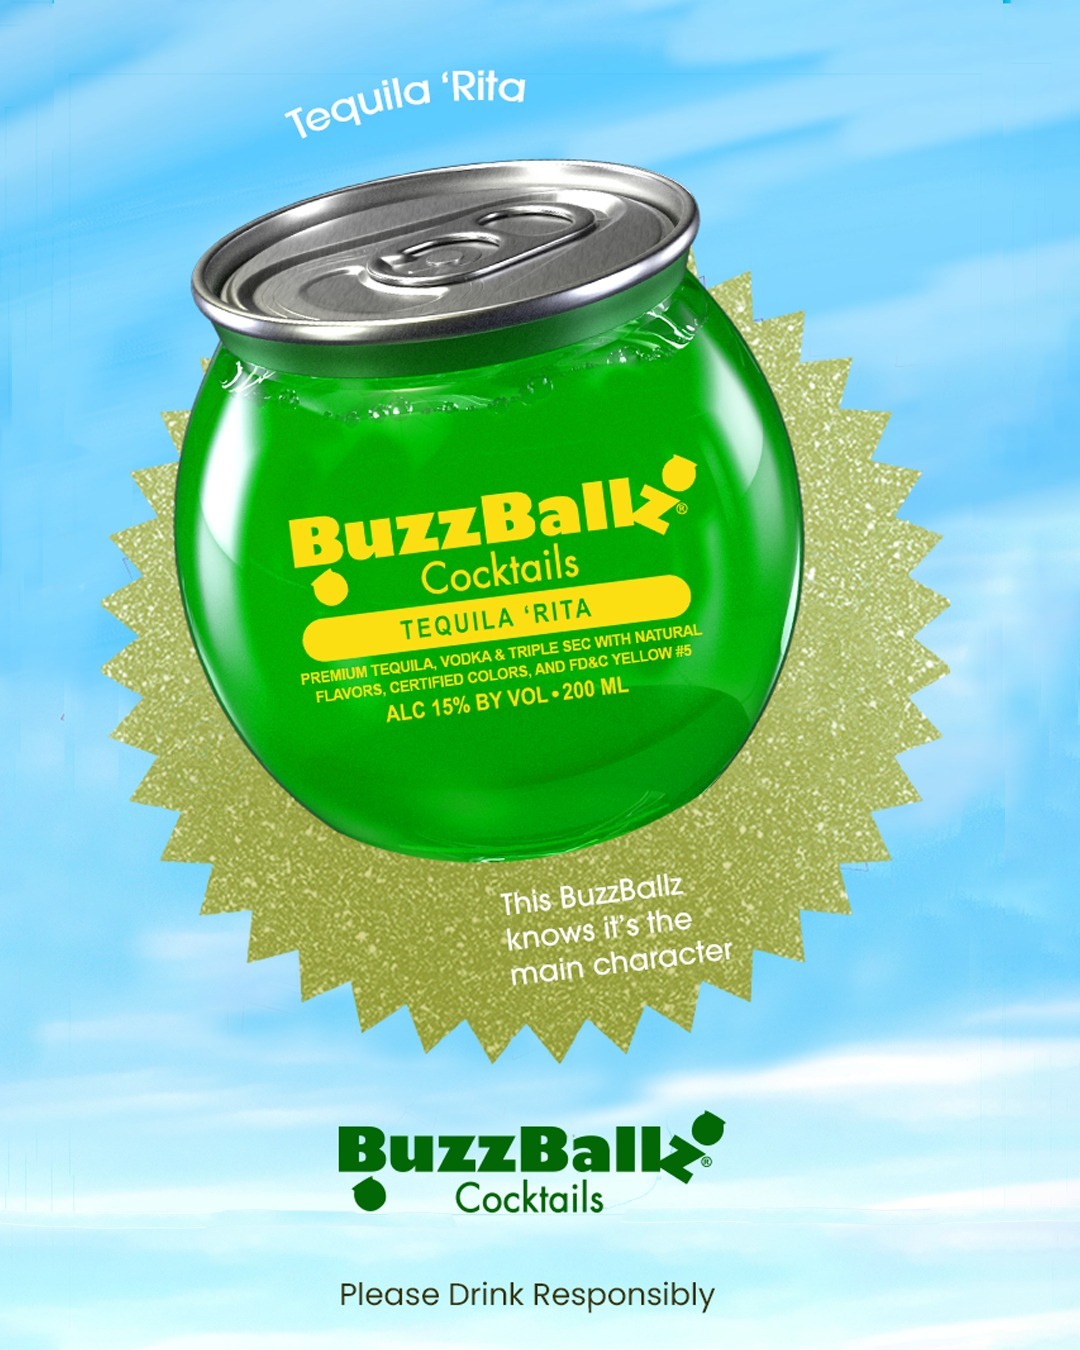 We’re all living in a BuzzBallz world